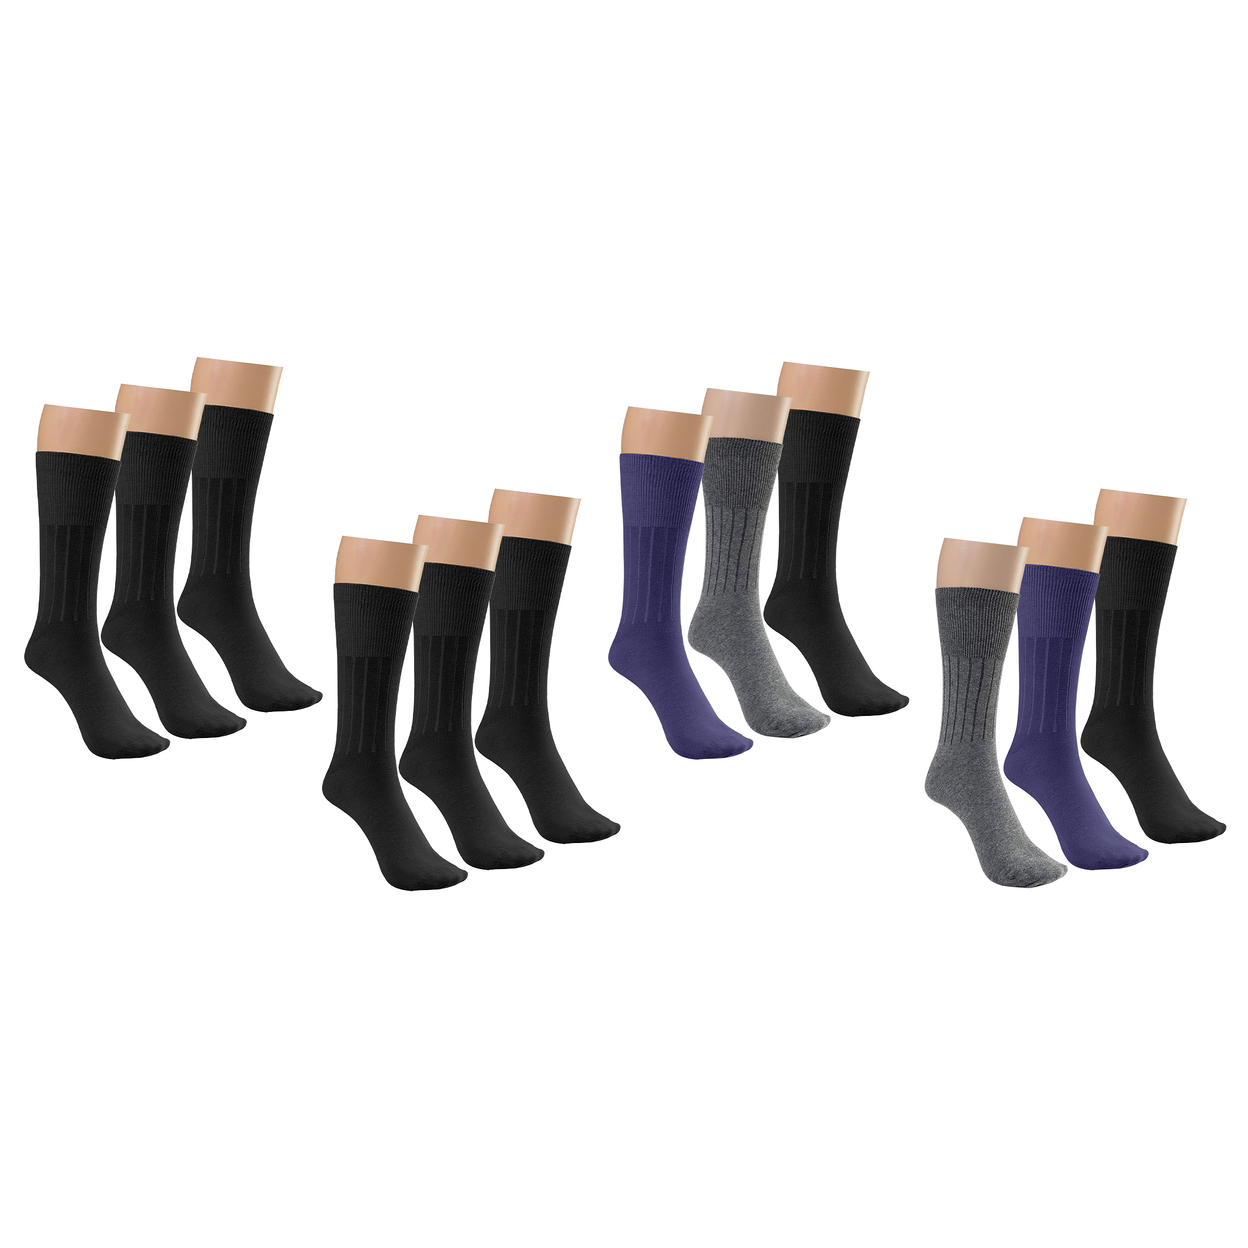 6-Pairs: Physician Approved Non-Binding Diabetic Circulatory Comfortable Moisture Wicking Dress Socks - Black